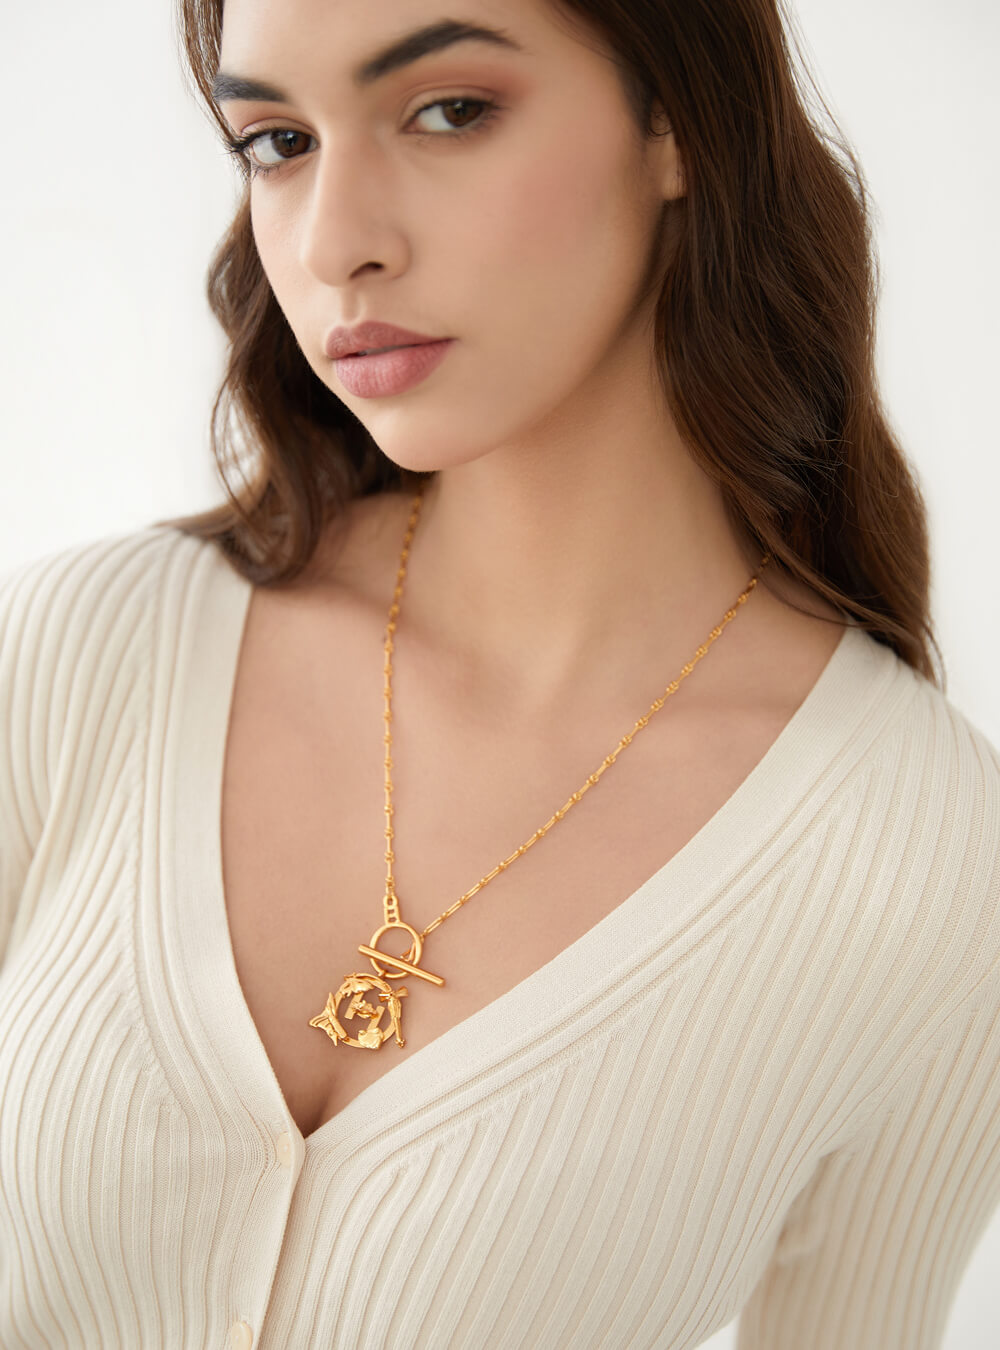 Sweetheart Bridal Necklace By Chez Bec | notonthehighstreet.com